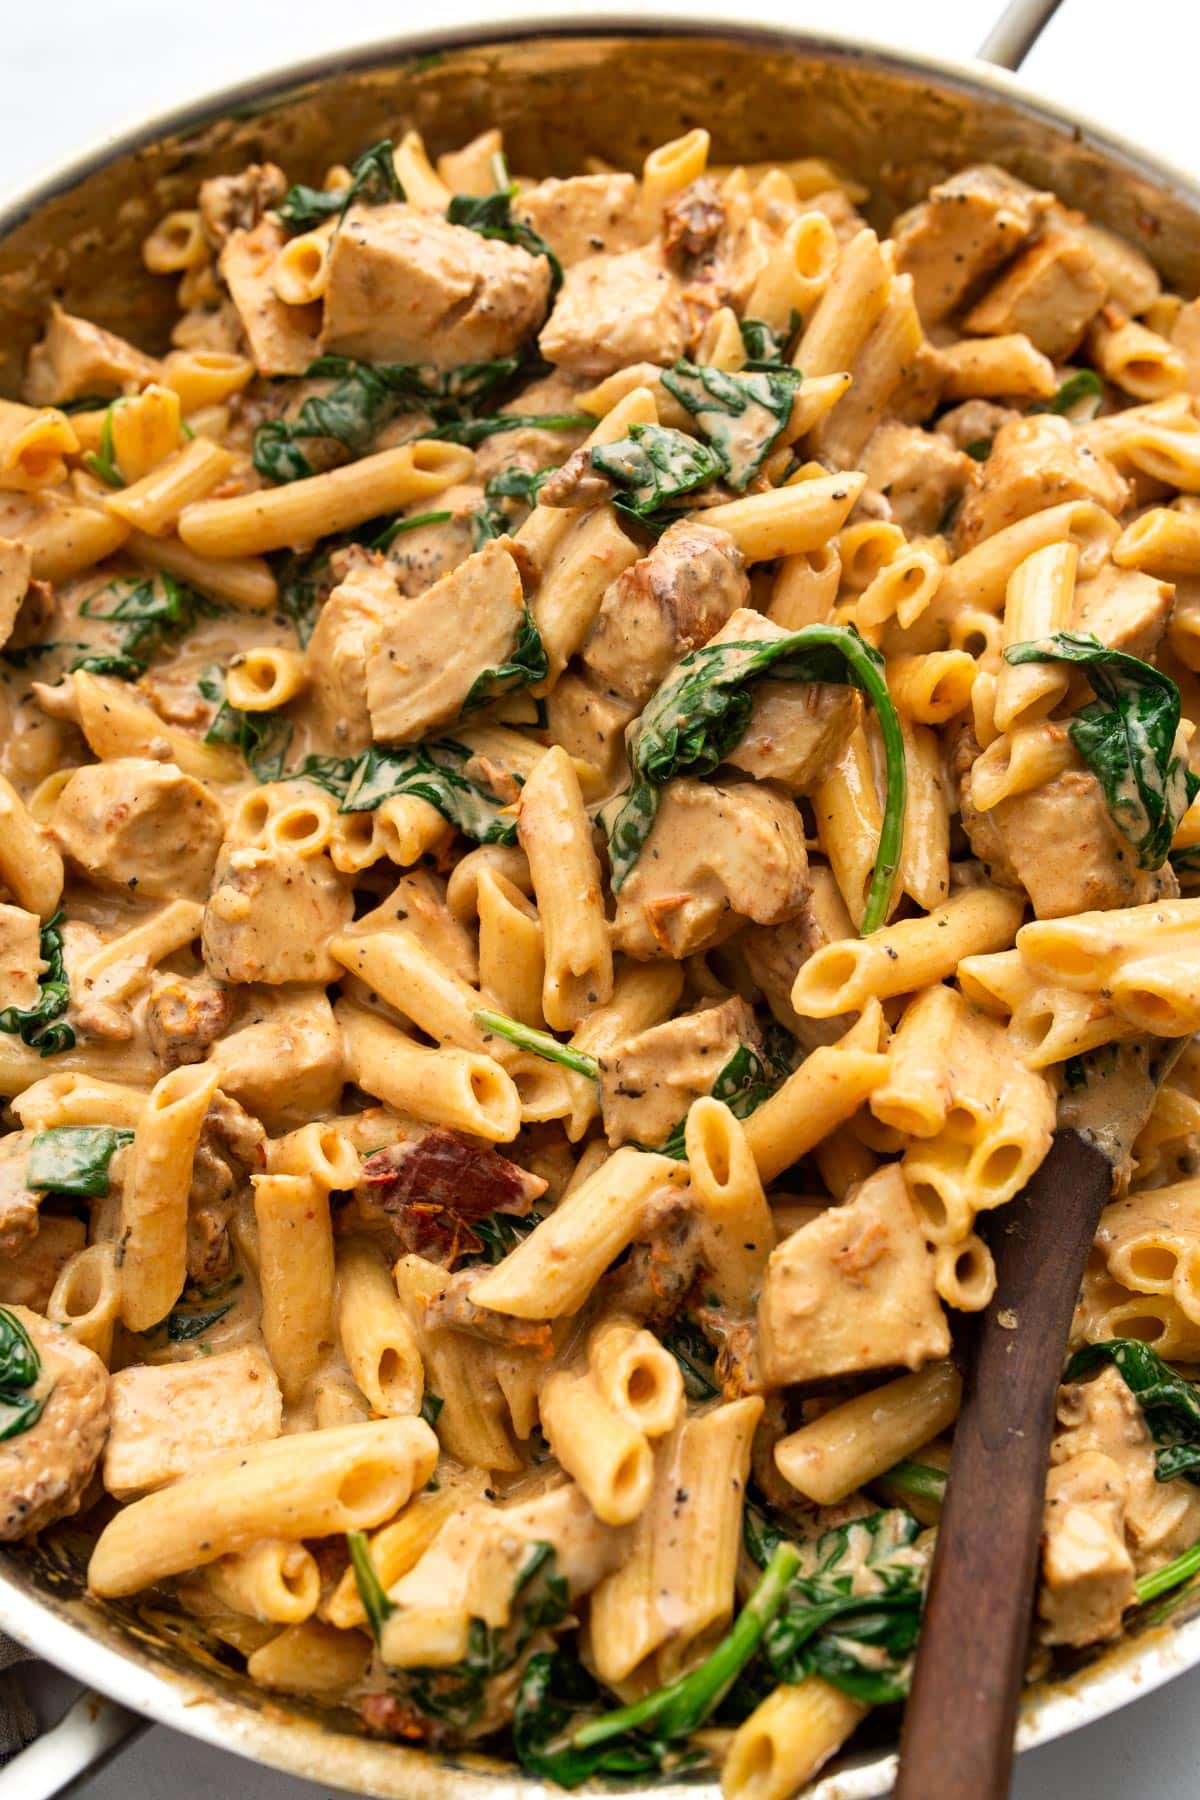 Creamy Tuscan chicken pasta in a stainless steel skillet.